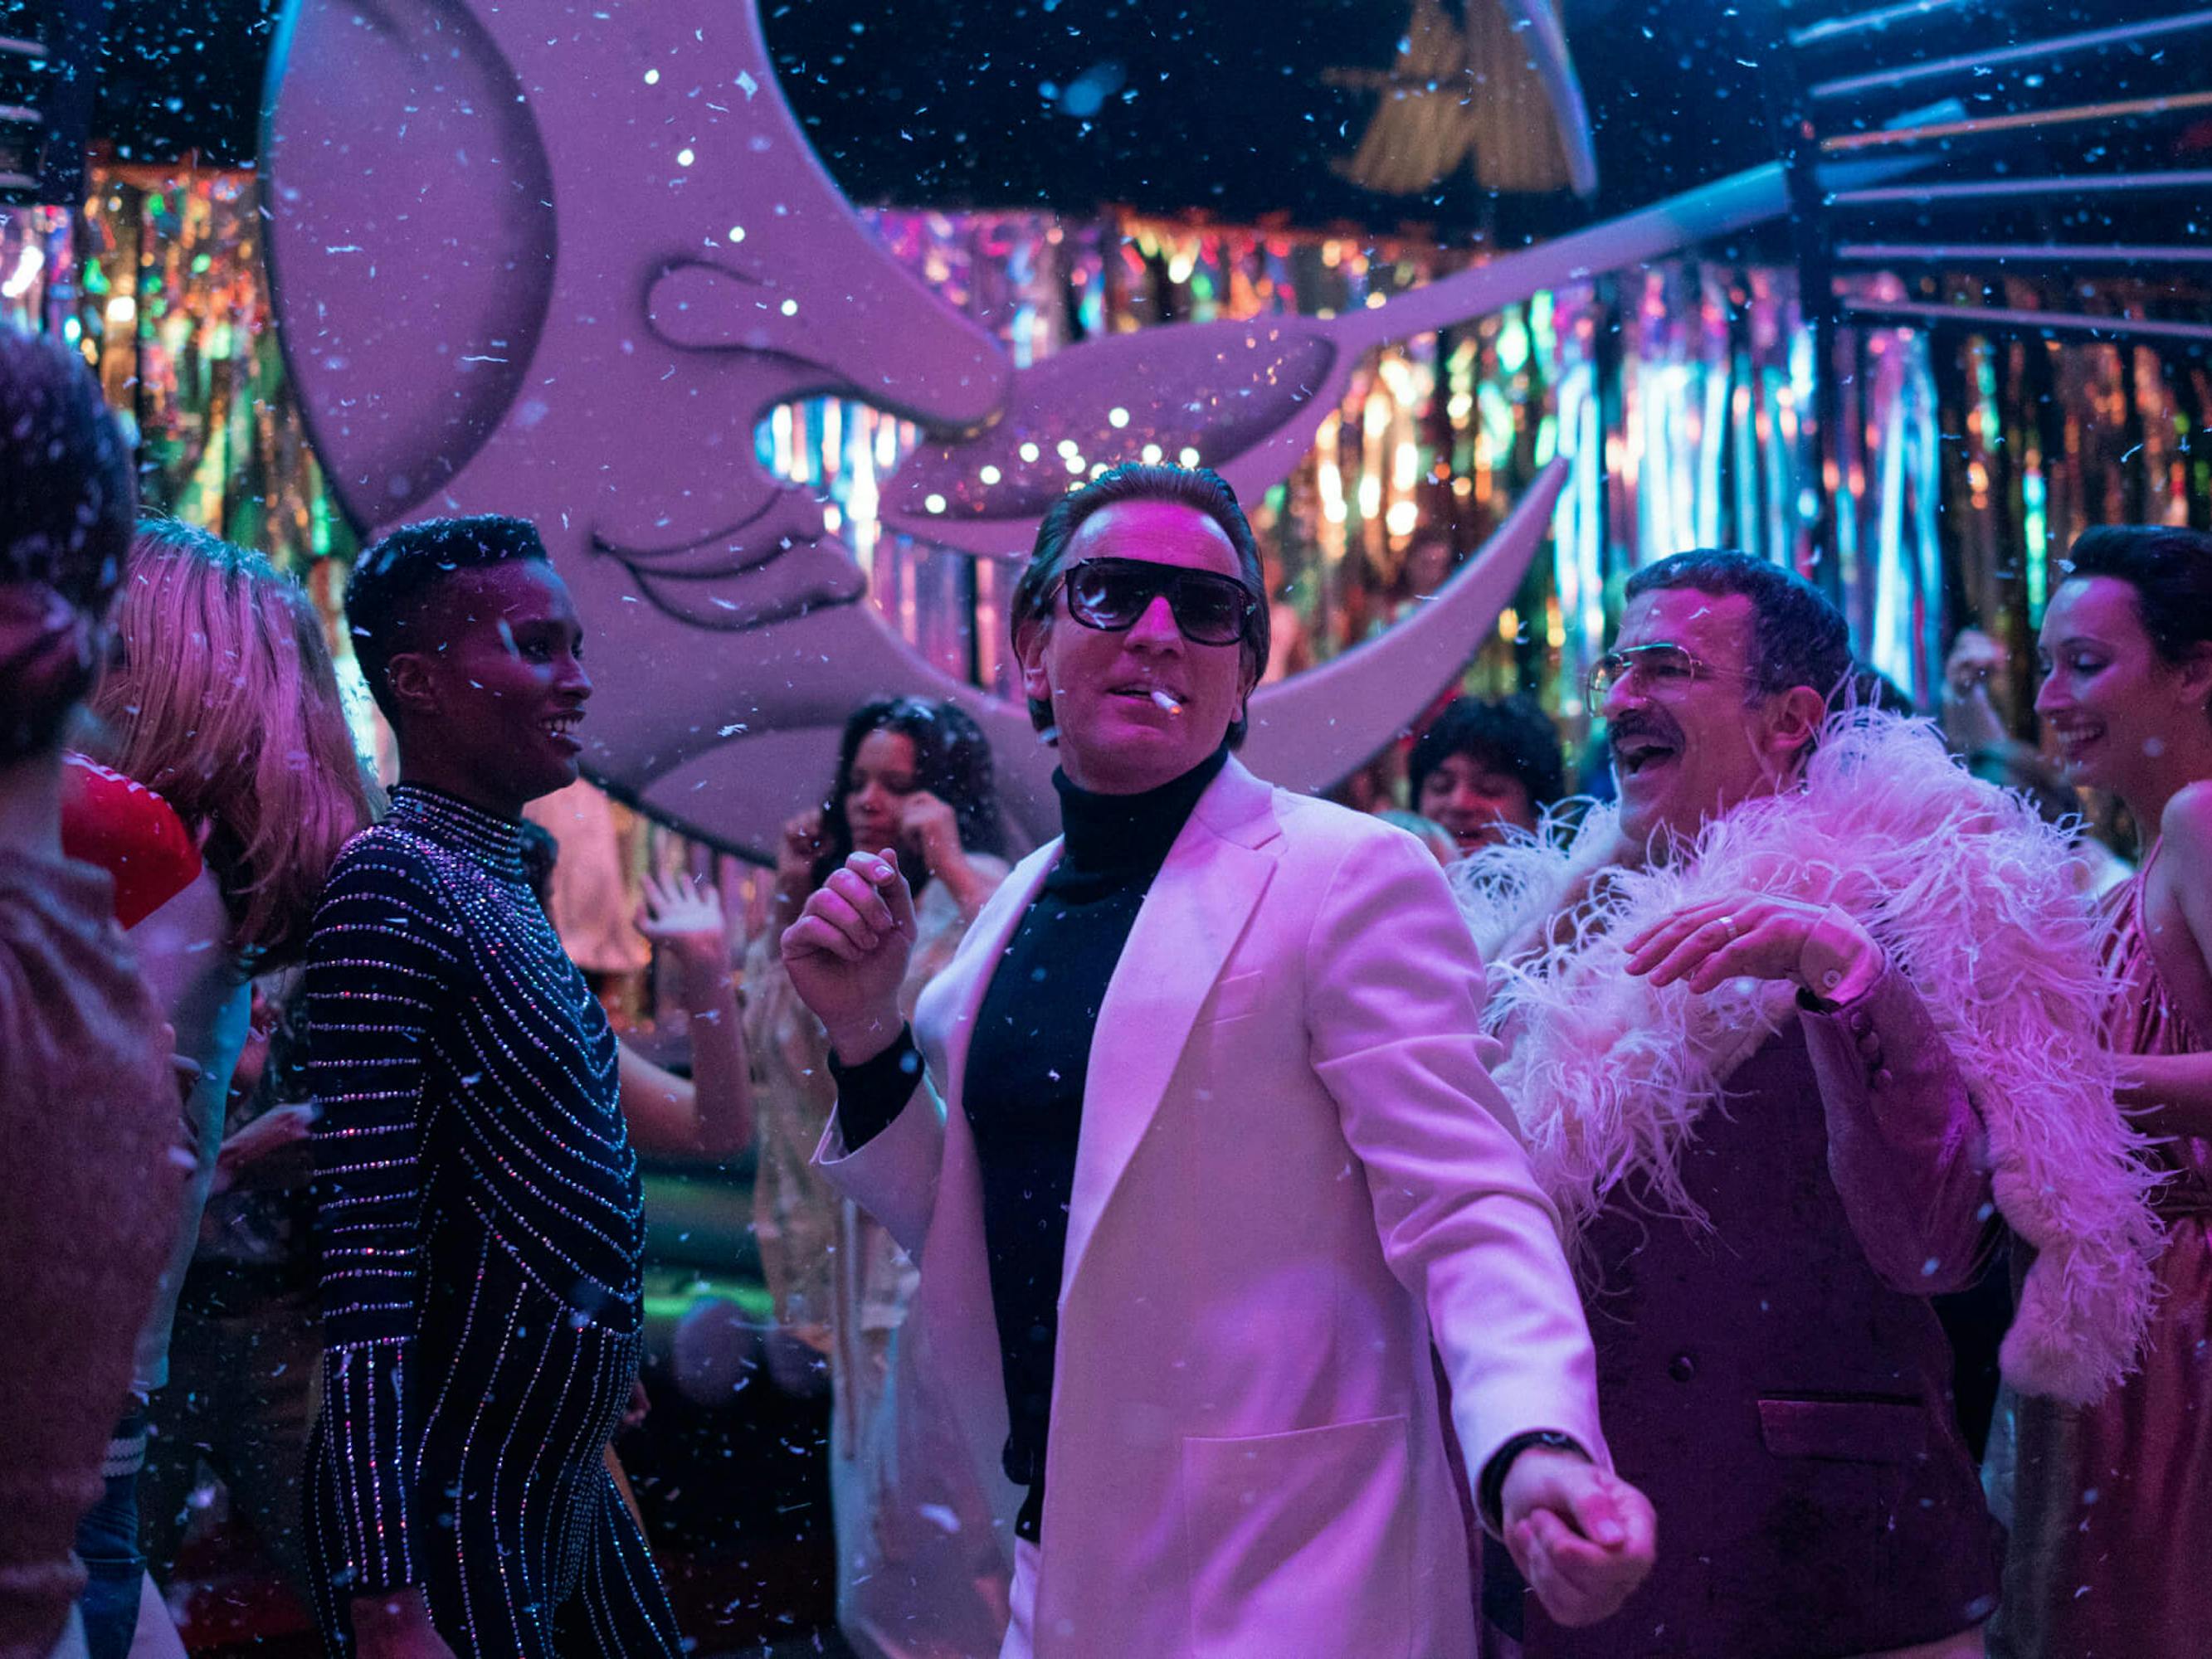 Halston (Ewan McGregor), Joe Eula (David Pittu), and Elsa Peretti (Rebecca Dayan) dance in Studio 54. Halston wears a white suit, Eula wears a feathered poncho, and Peretti wears a dress. The scene is lit by streamers and rainbow lights.